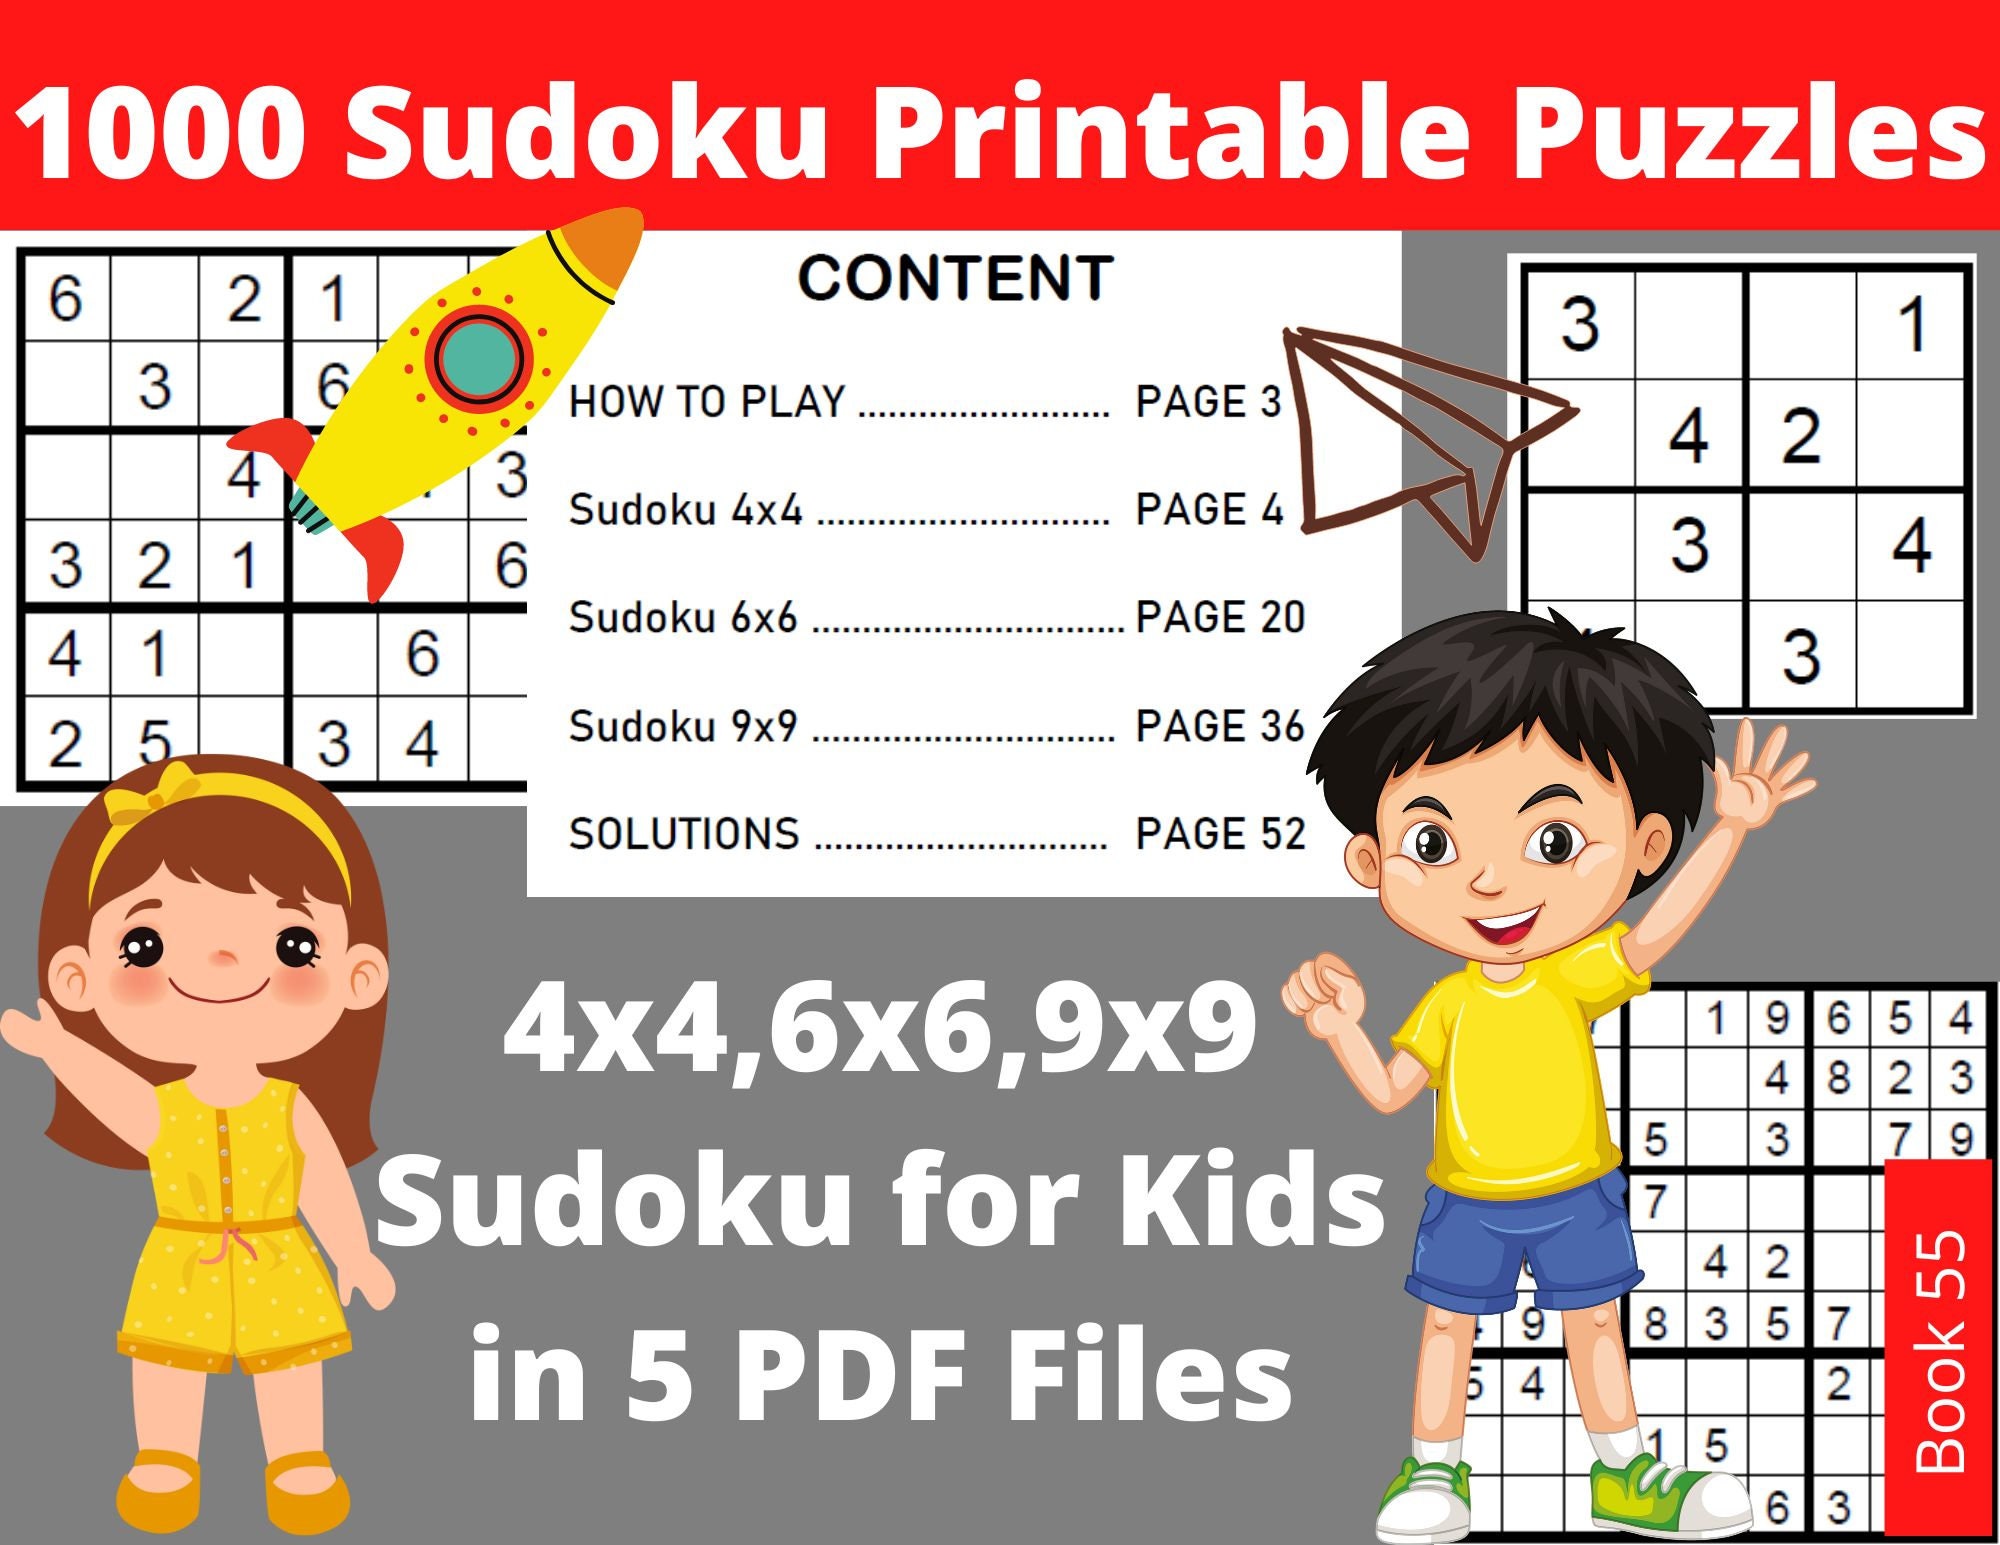 Easy Sudoku Puzzle Book for Kids: Brain Games 200 Sudoku Puzzle Books 4x4  and 6x6 for Kids, Toddlers, Boys, Girls Age 4 to 8 with Solutions - Sudoku  Puzzles Book for Beginners (